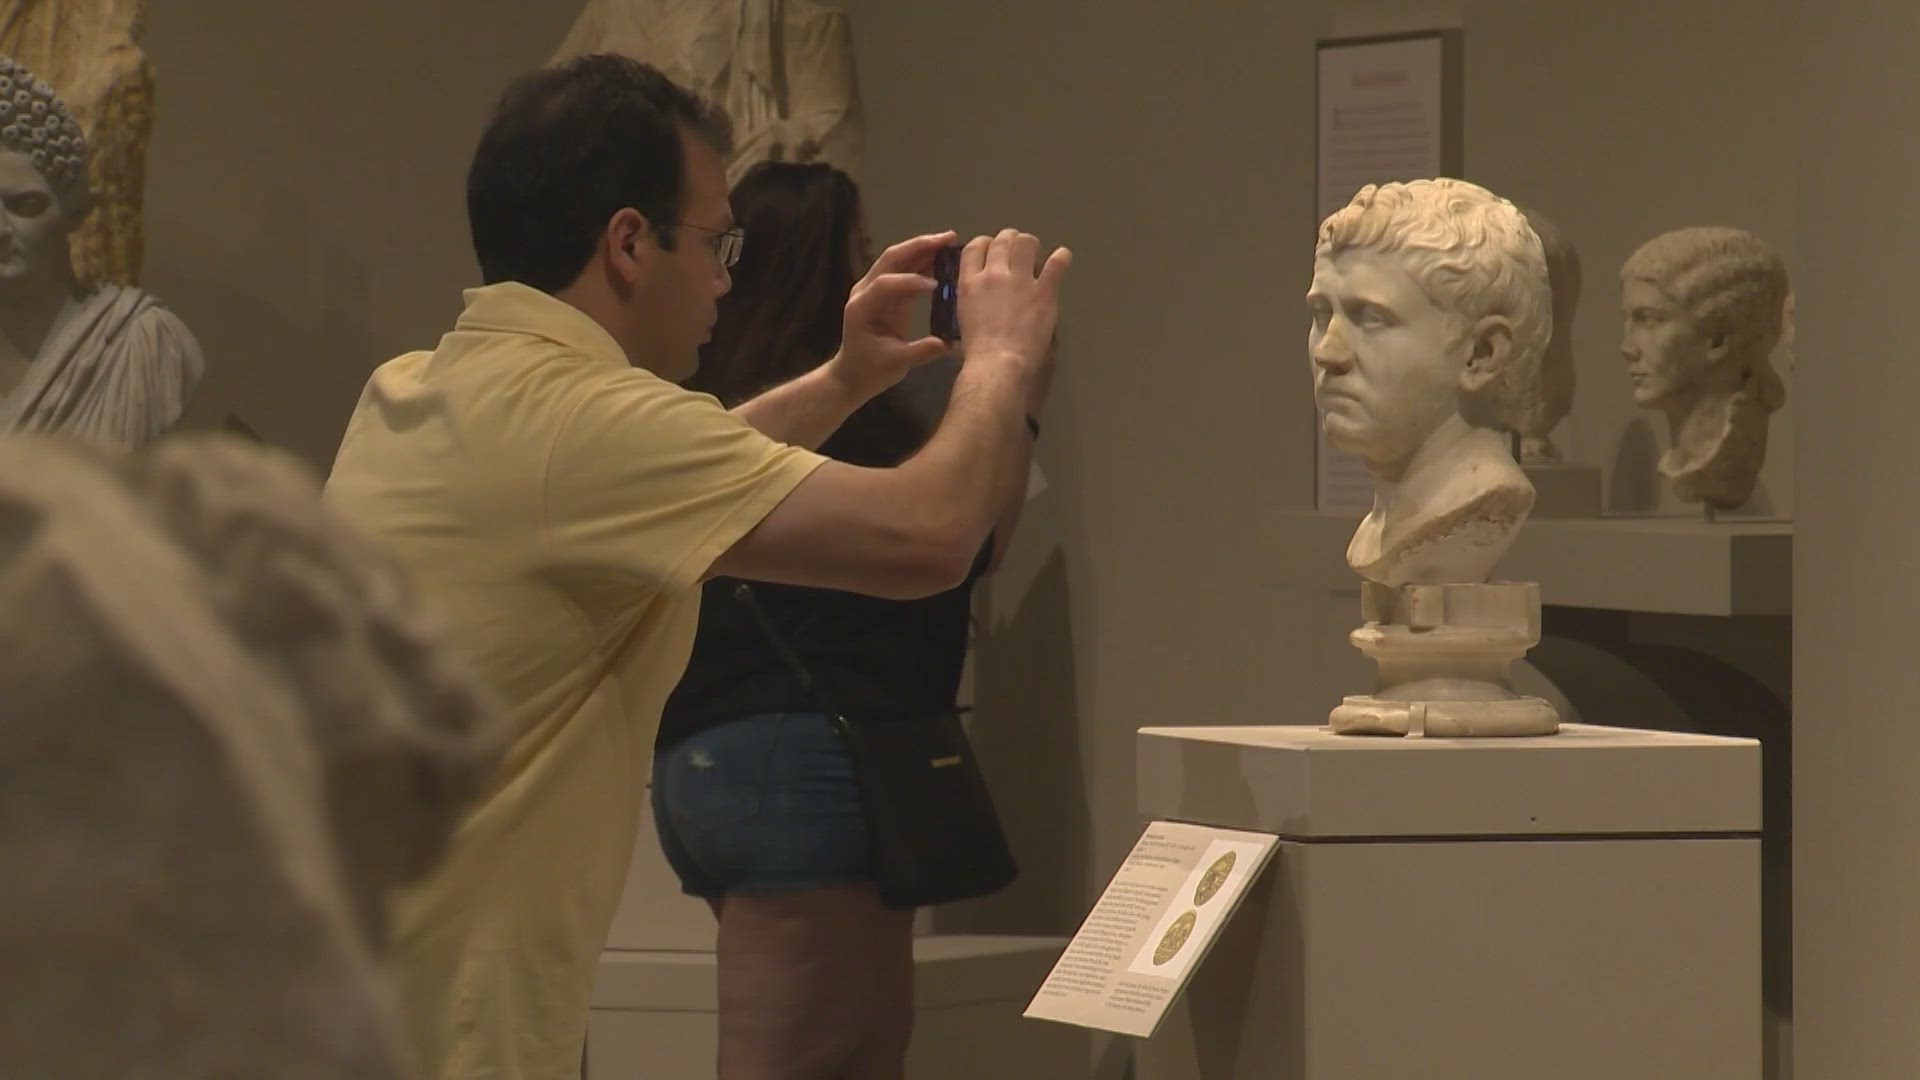 An ancient Roman bust was found at an Austin Goodwill store for $35